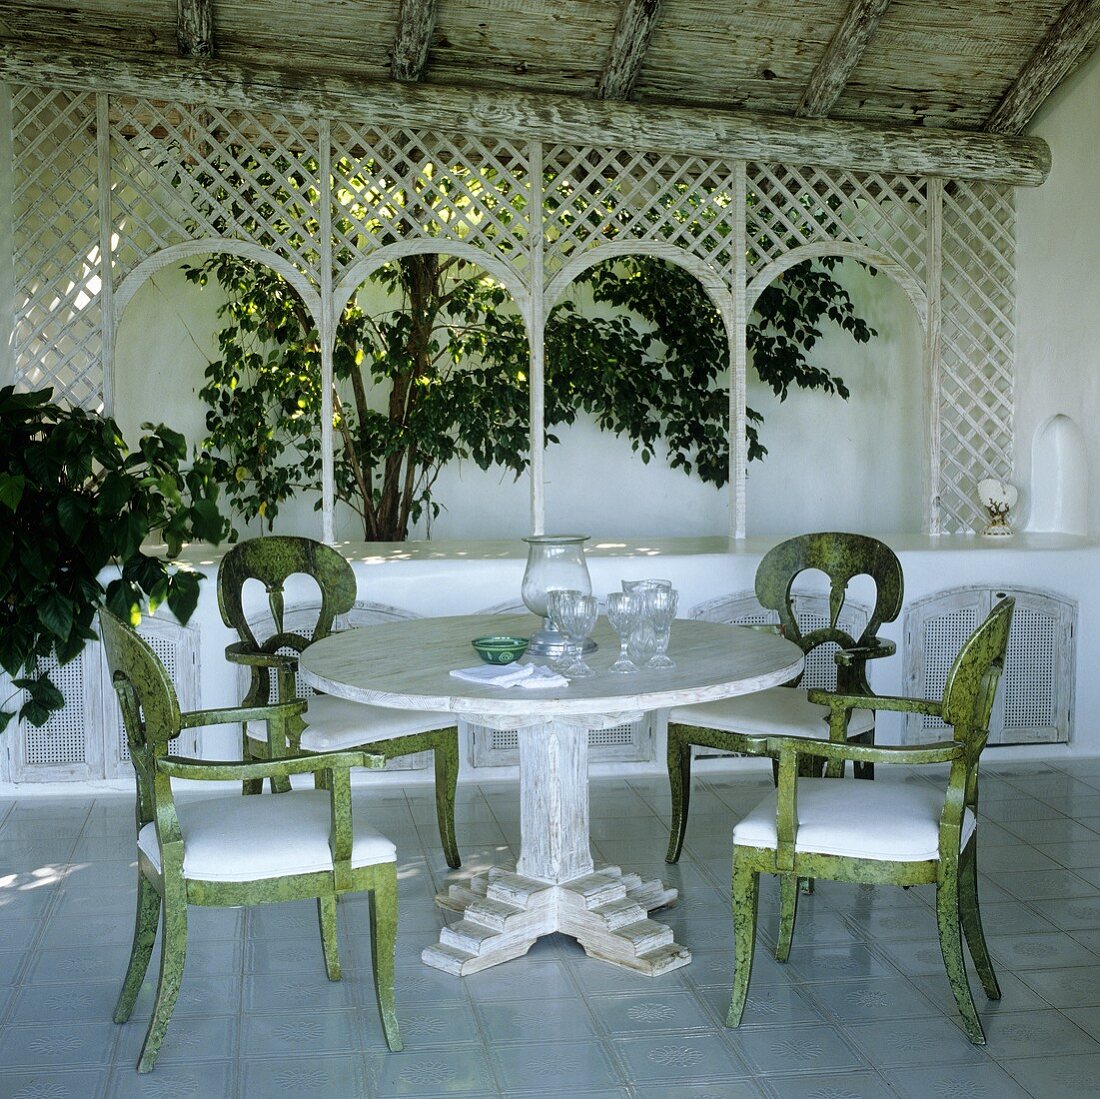 Green curved wooden chairs around a round table and wooden lattice wall with rounded arches on a veranda